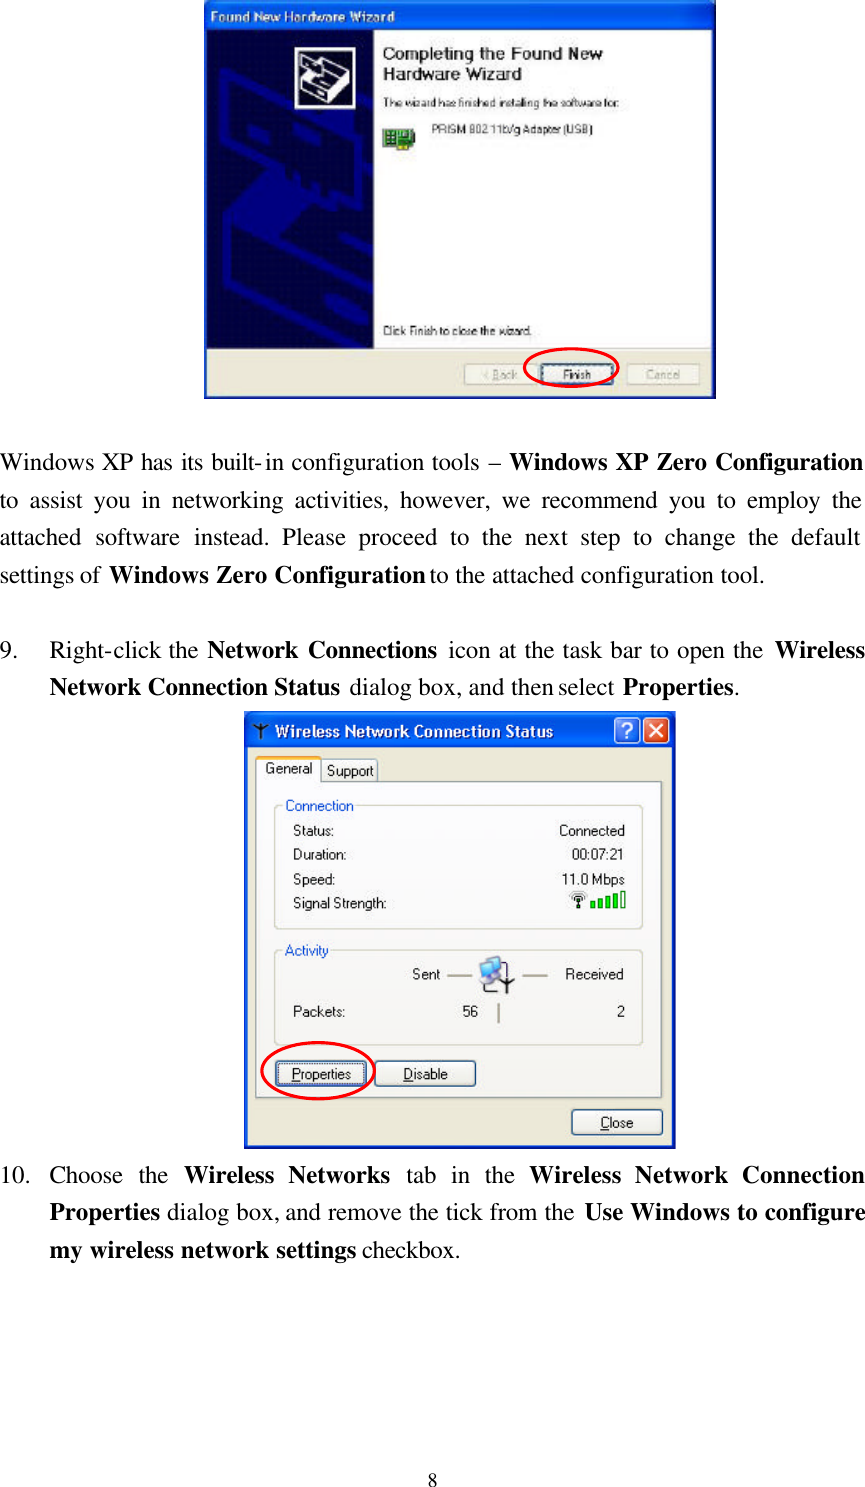  8  Windows XP has its built-in configuration tools – Windows XP Zero Configuration to assist you in networking activities, however, we recommend you to employ the attached software instead. Please proceed to the next step to change the default settings of Windows Zero Configuration to the attached configuration tool.  9.  Right-click the Network Connections icon at the task bar to open the Wireless Network Connection Status dialog box, and then select Properties.  10.  Choose the Wireless Networks tab in the Wireless Network Connection Properties dialog box, and remove the tick from the Use Windows to configure my wireless network settings checkbox. 